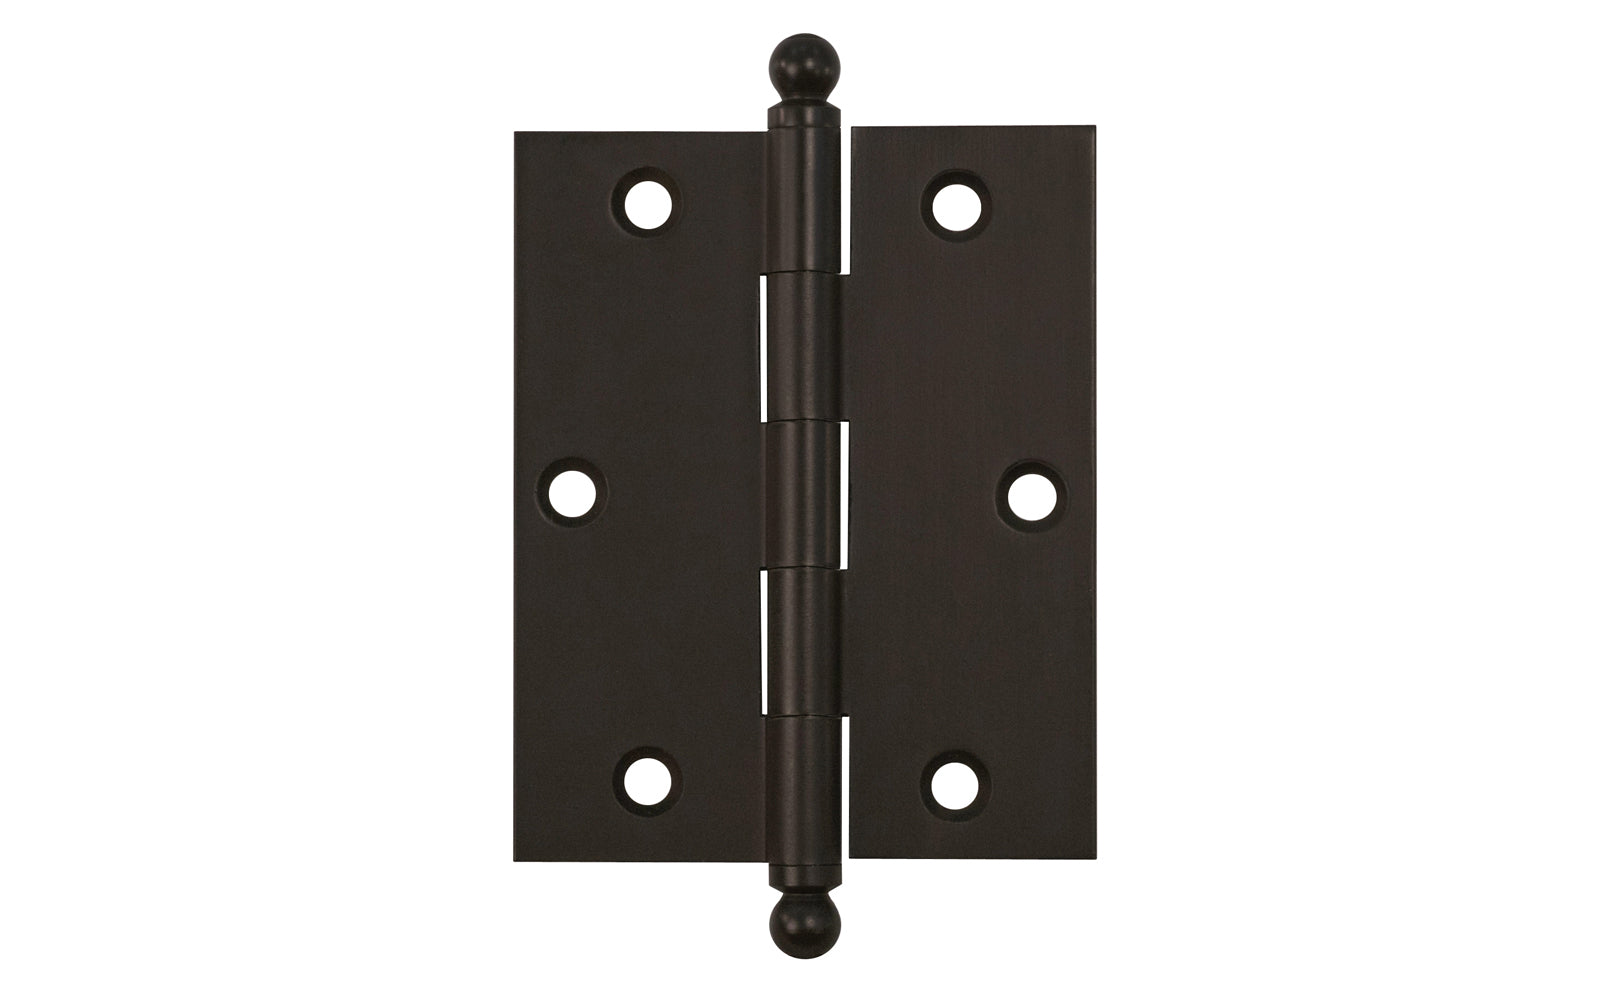 Classic Solid Brass Ball-Tip Cabinet Hinge ~ 2-1/2" x 2". Full mortise extruded hinges. 3/32" heavy duty leaf thickness gauge. Non-removable fixed hinge pin with ball tips. High quality thick cabinet hinge with ball tips. Oil rubbed bronze finish.